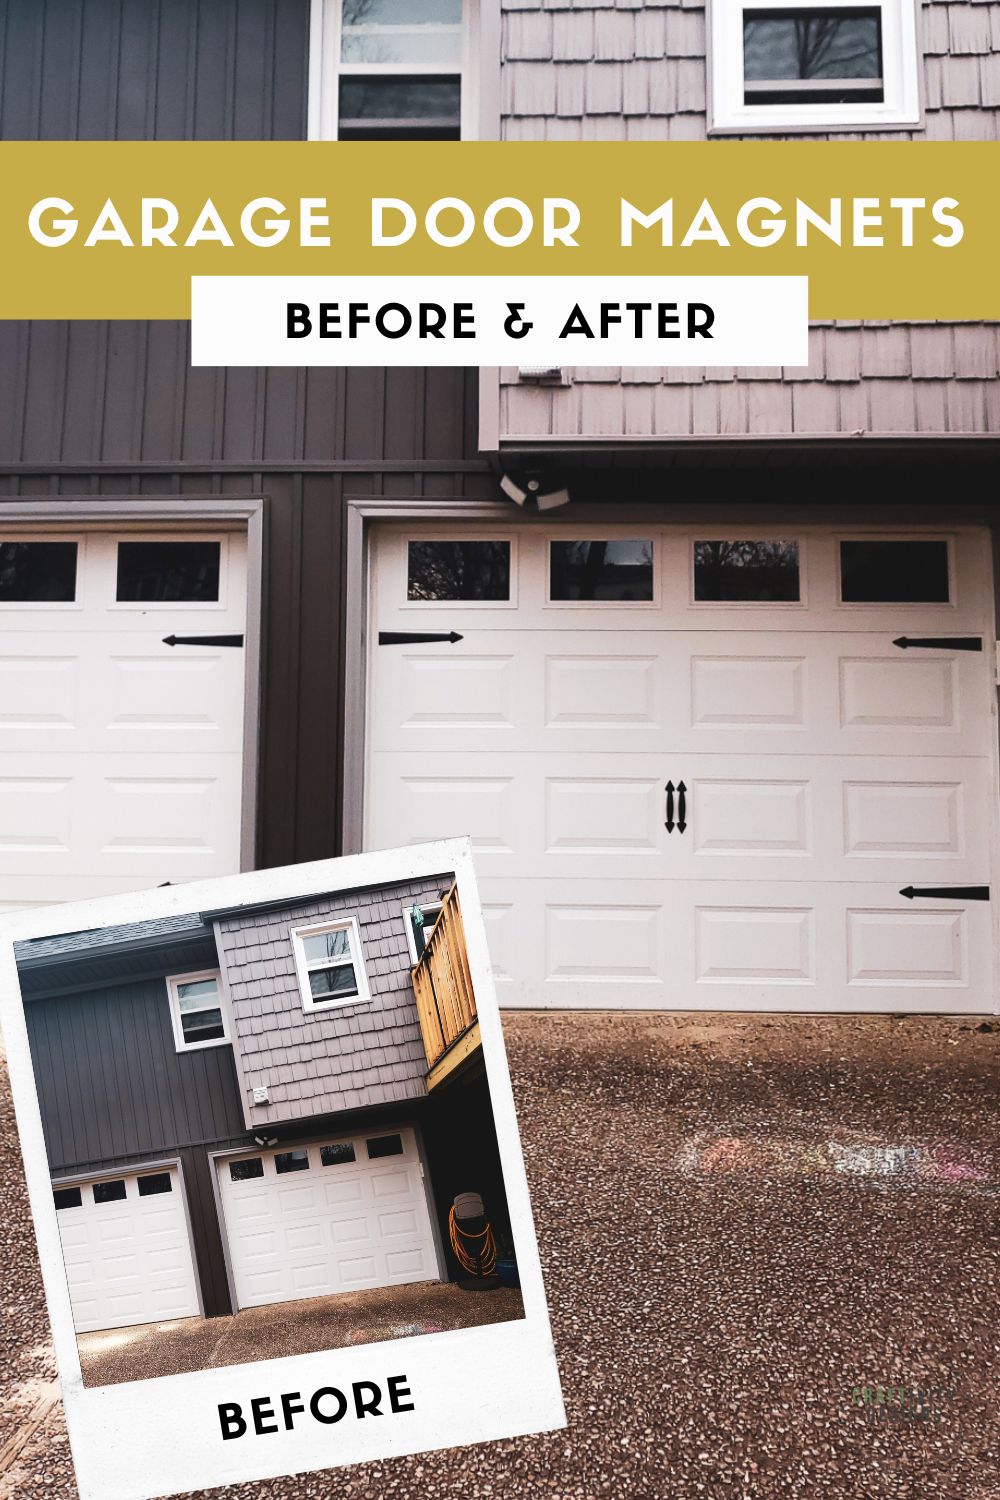 Things to consider when decorating your garage - Maggwire